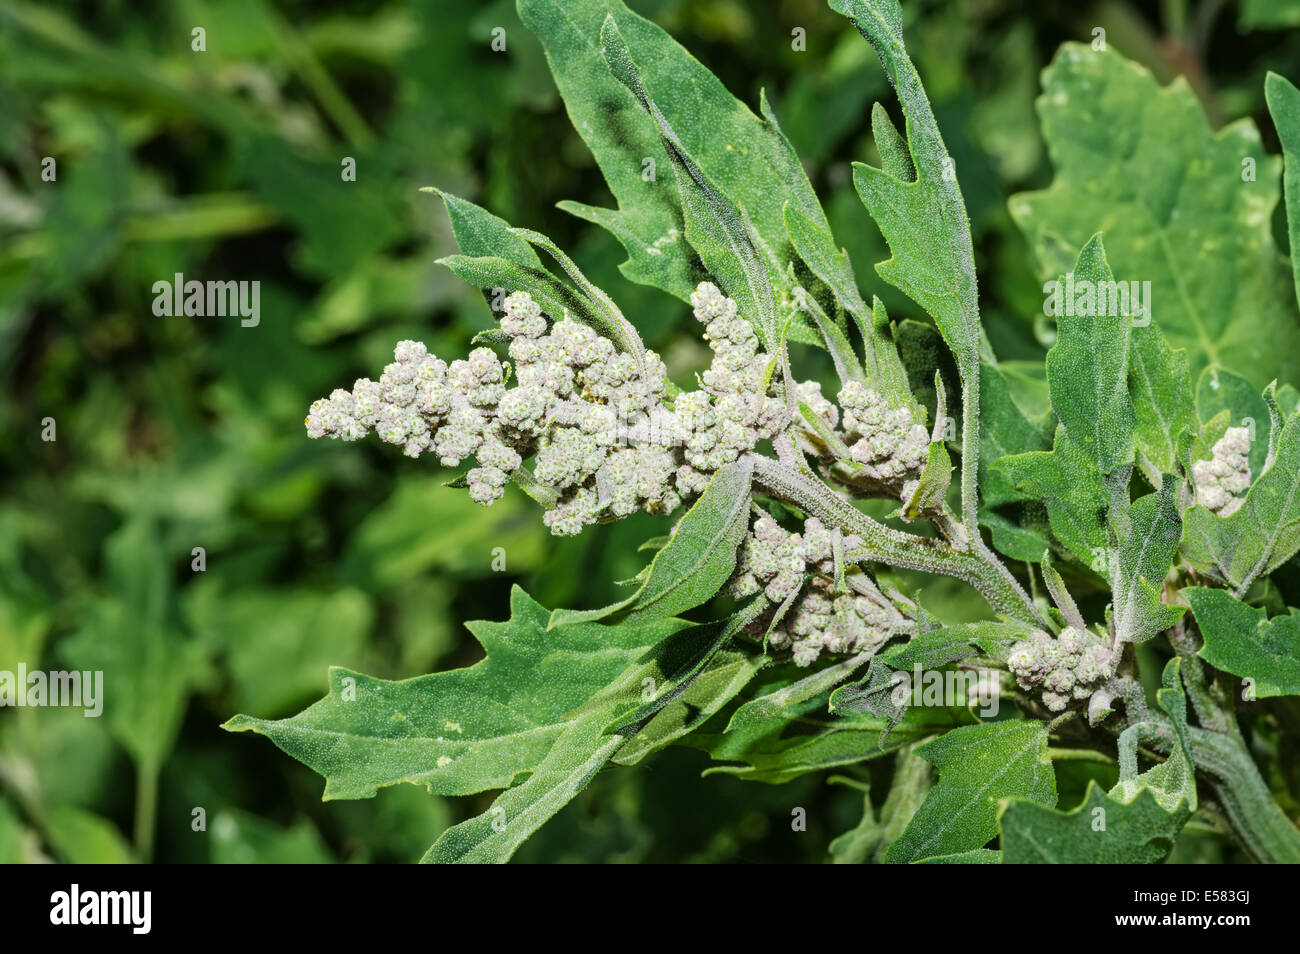 growing quinoa plant with seed head Stock Photo